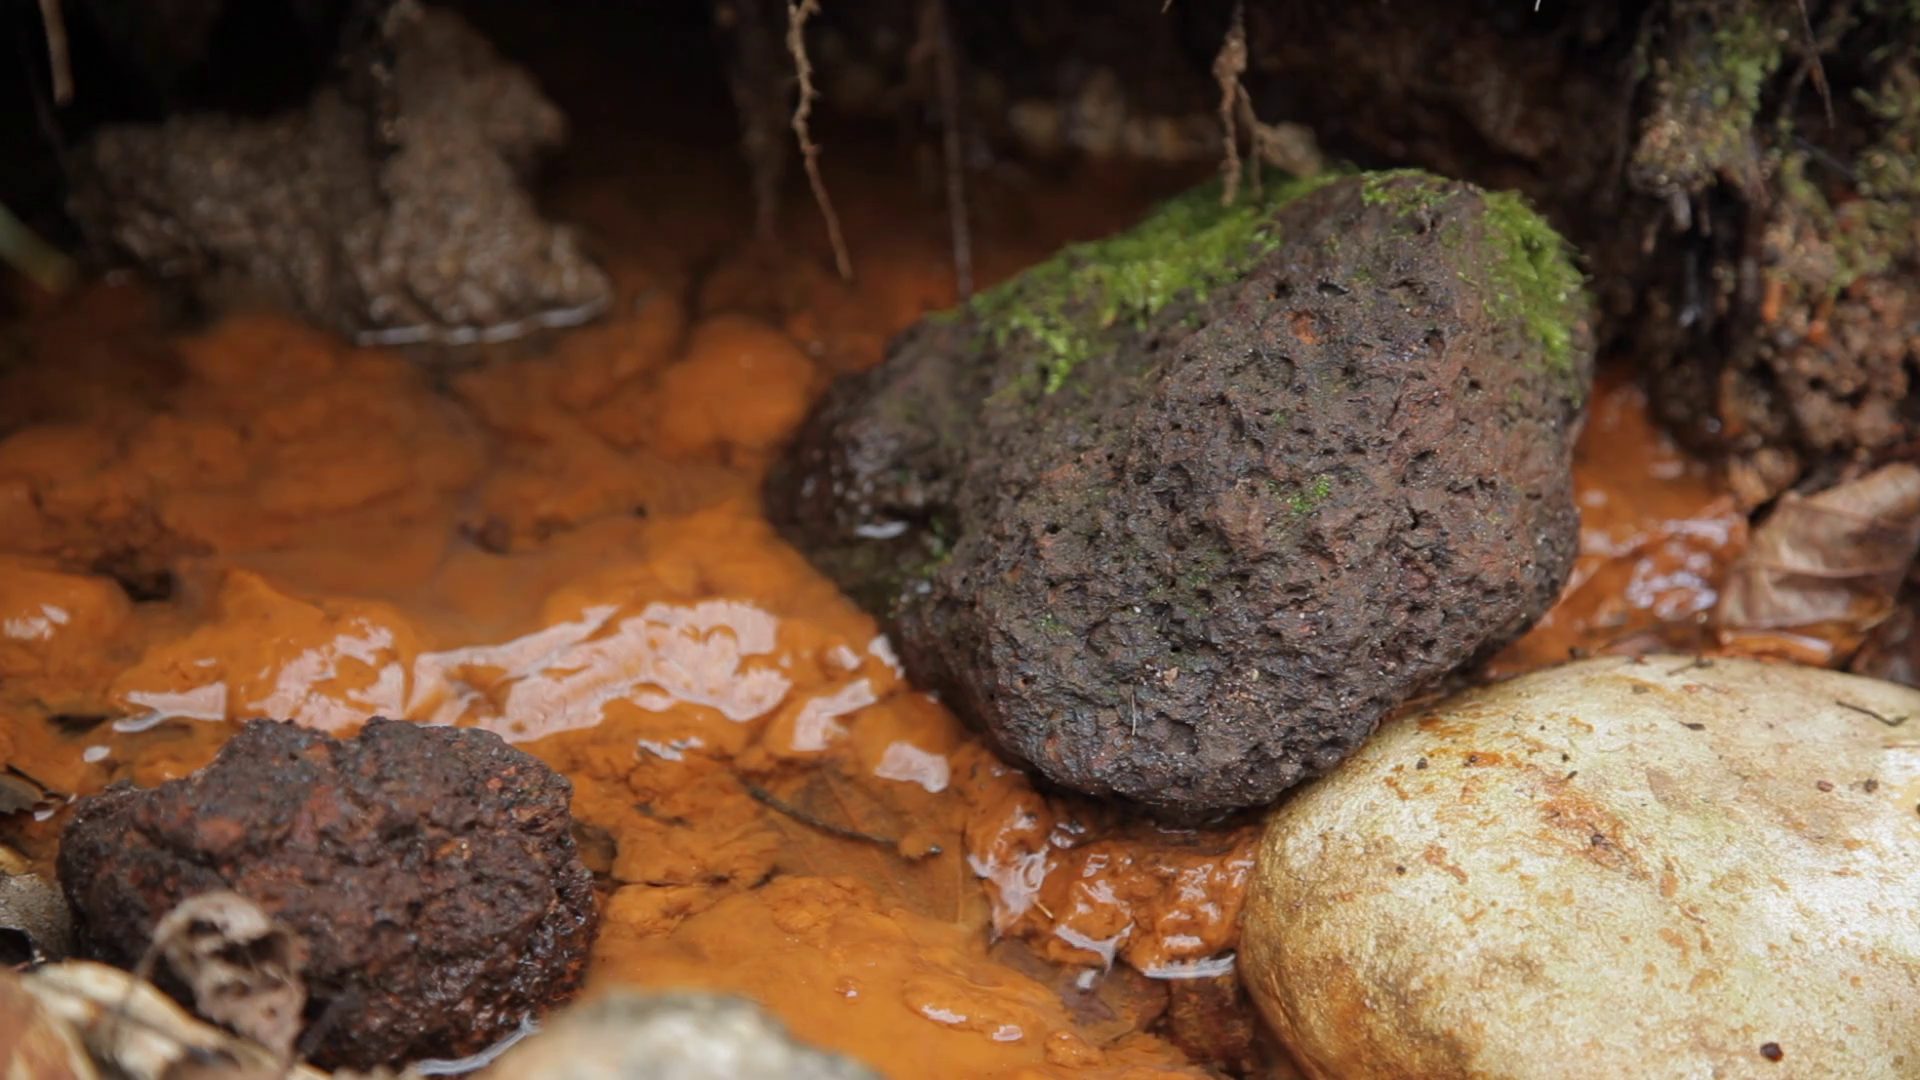 Bog Iron Ore In Spring Flood. Iron smelting from bog iron was ...